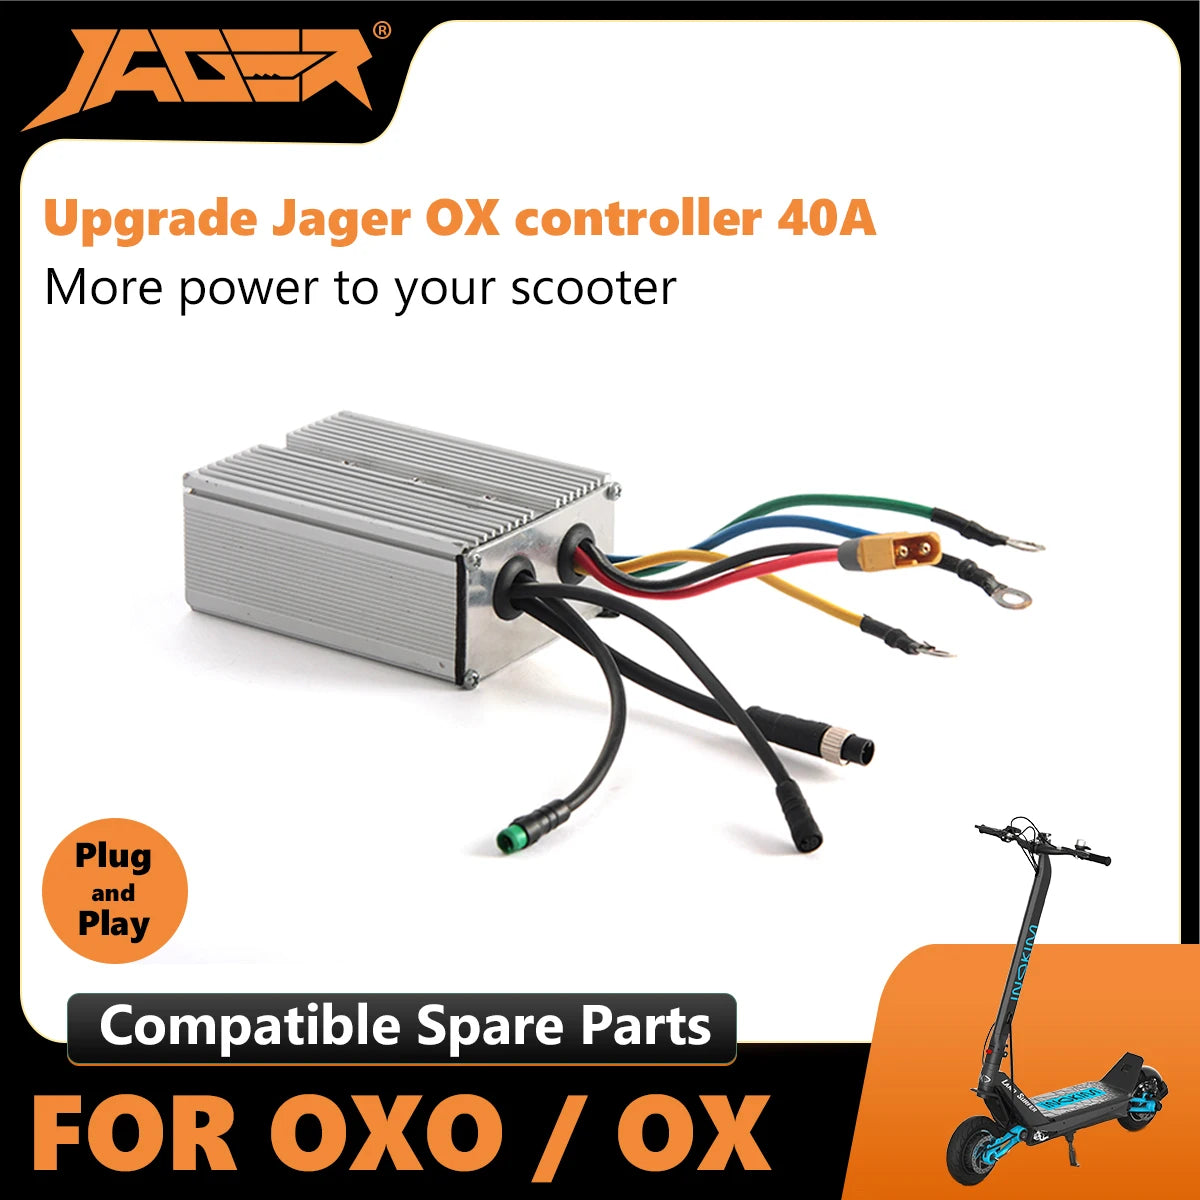 Jager OX controller generation 5 compatible Inokim OX upgrade 12MOS DC Motor brushless controller 40A inokim parts accessories